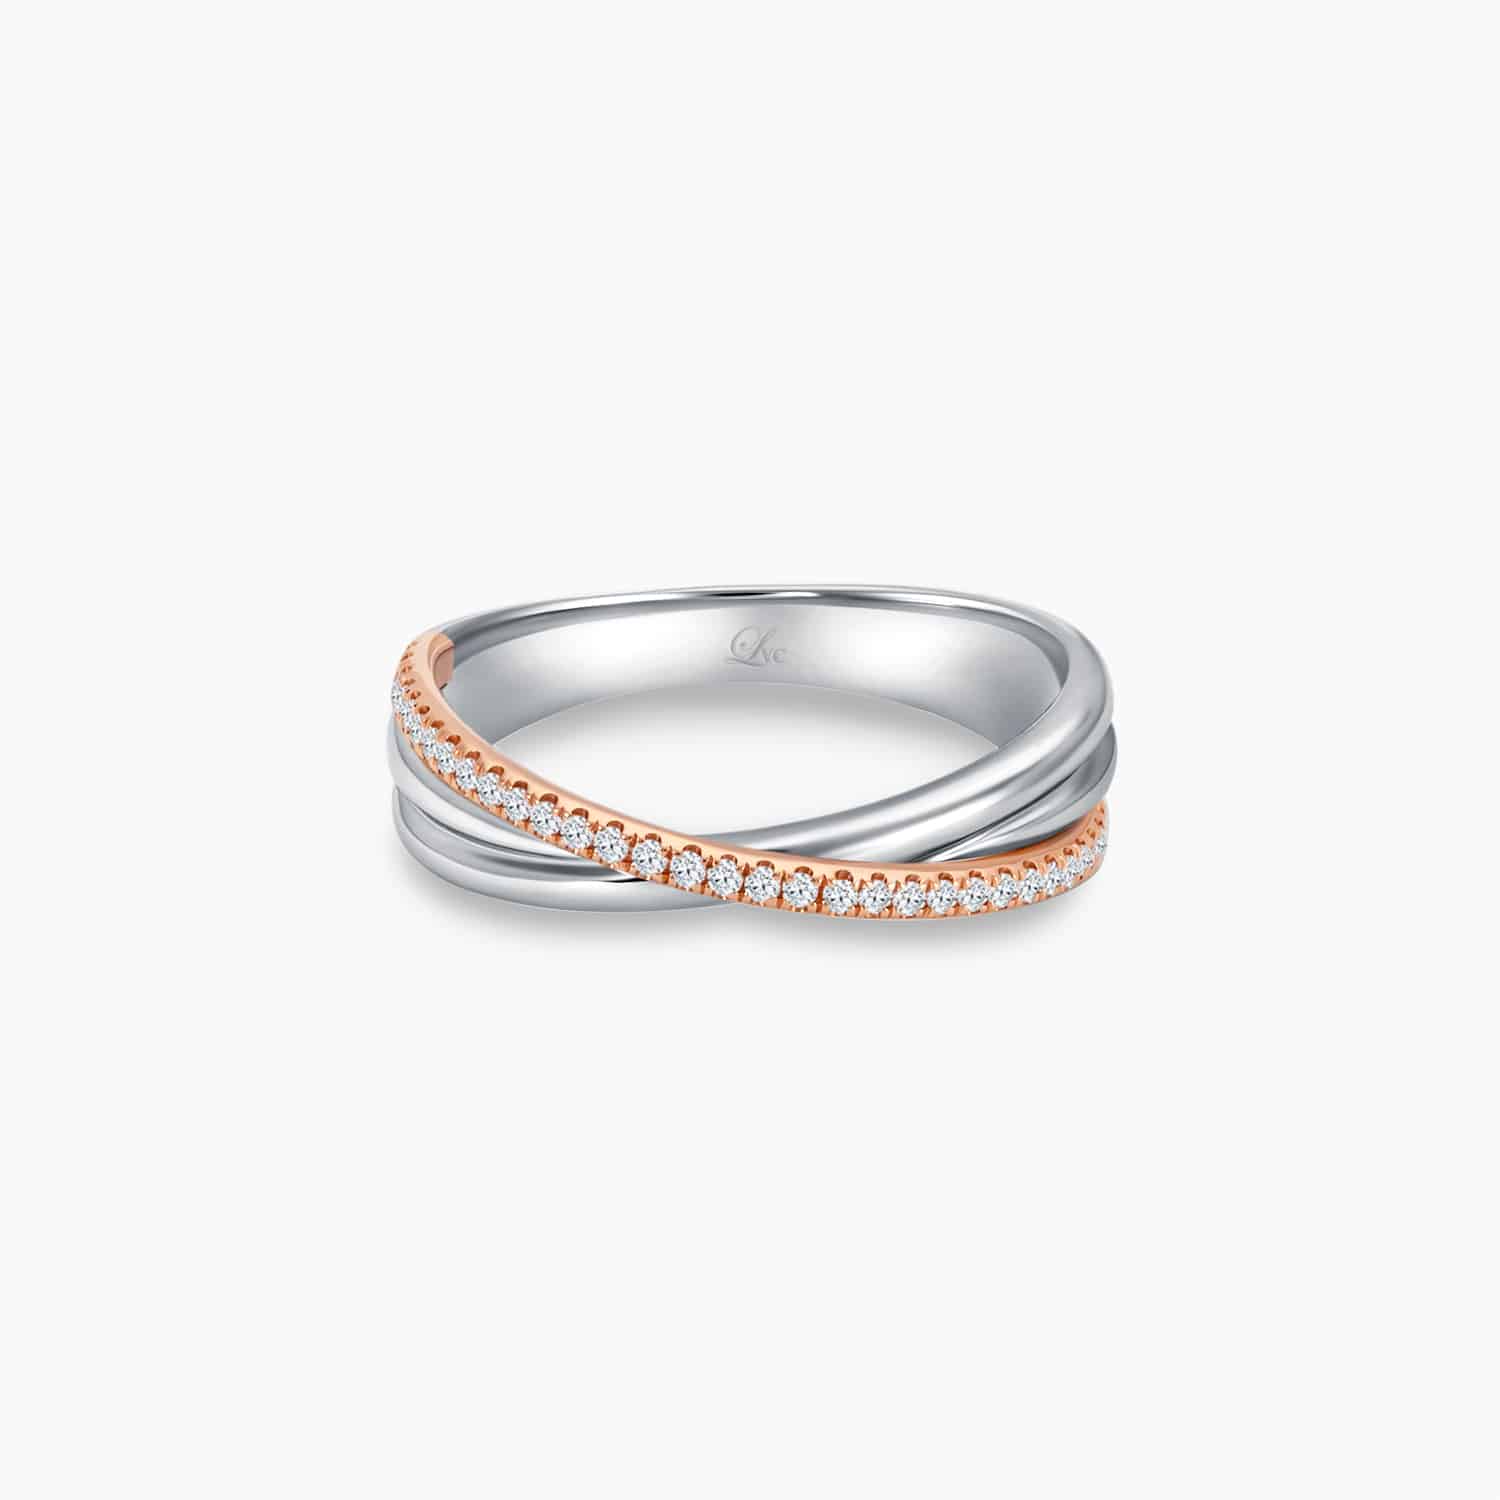 LVC Desirio Cross Wedding Band for women in White Gold with Brilliant Diamonds on a Rose Gold Band